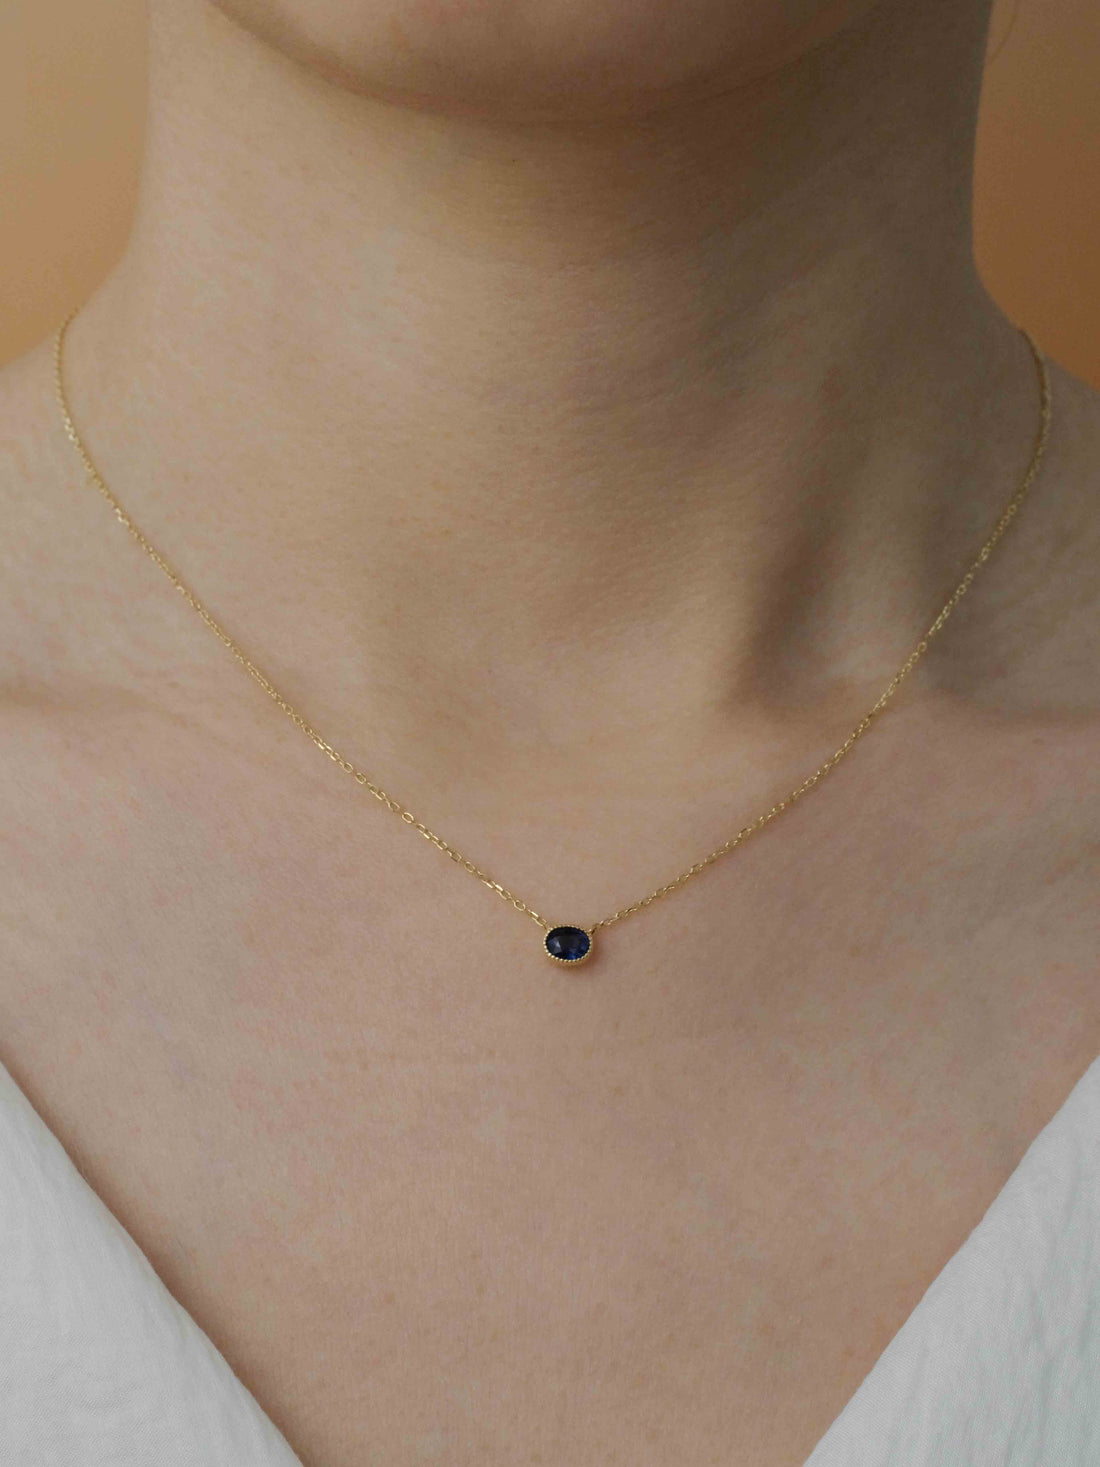 Oval Sapphire Necklace, 18k solid gold